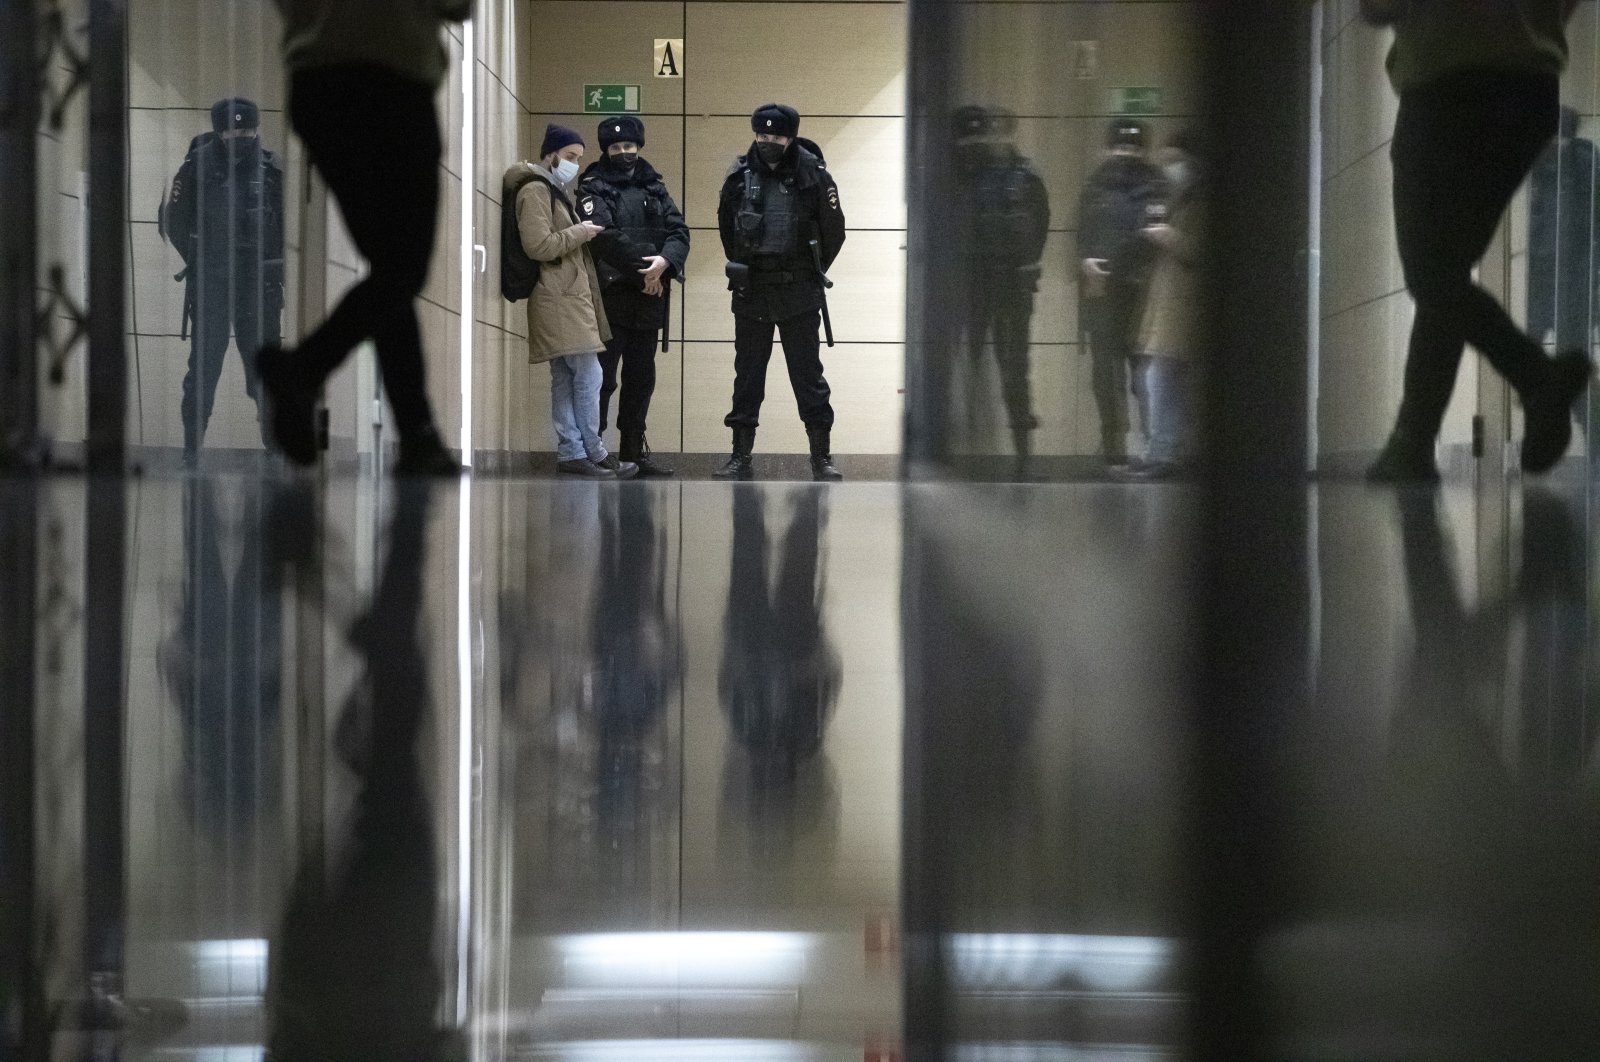 Police stand guard at the Foundation for Fighting Corruption office in Moscow, Russia, Wednesday, Jan. 27, 2021. (AP Photo)